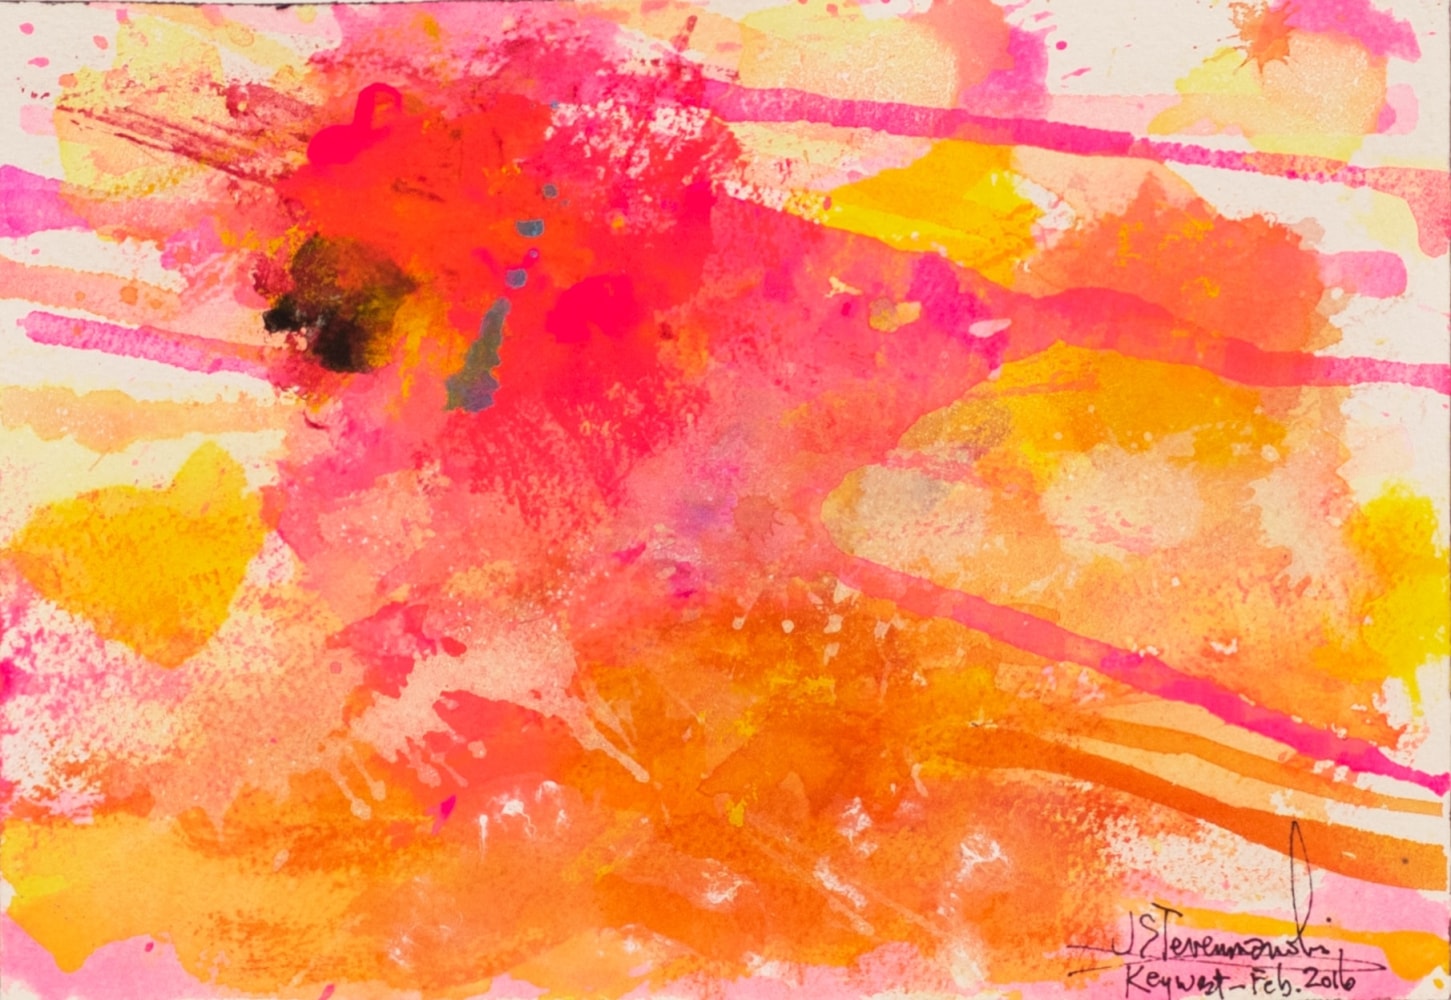 J. Steven Manolis, Flamingo 1832-2016 (Key West) 07.10.03, watercolor painting on paper, 7 x 10 inches, Pink and orange Abstract Art, Tropical Watercolor paintings for sale at Manolis Projects Art Gallery, Miami, Fl